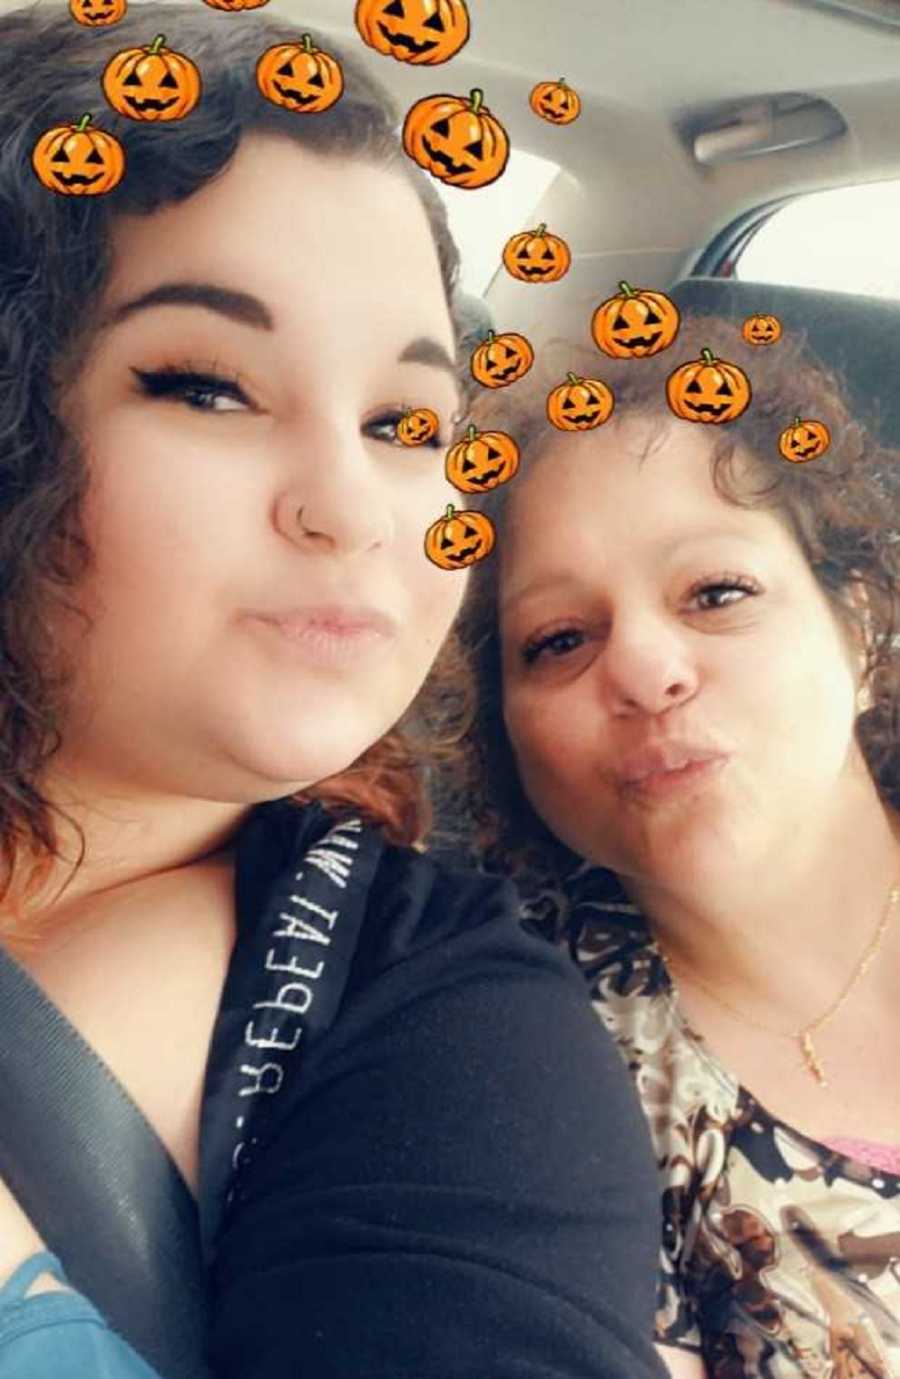 Woman with OCD purses lips in selfie with mother with pumpkin filter 